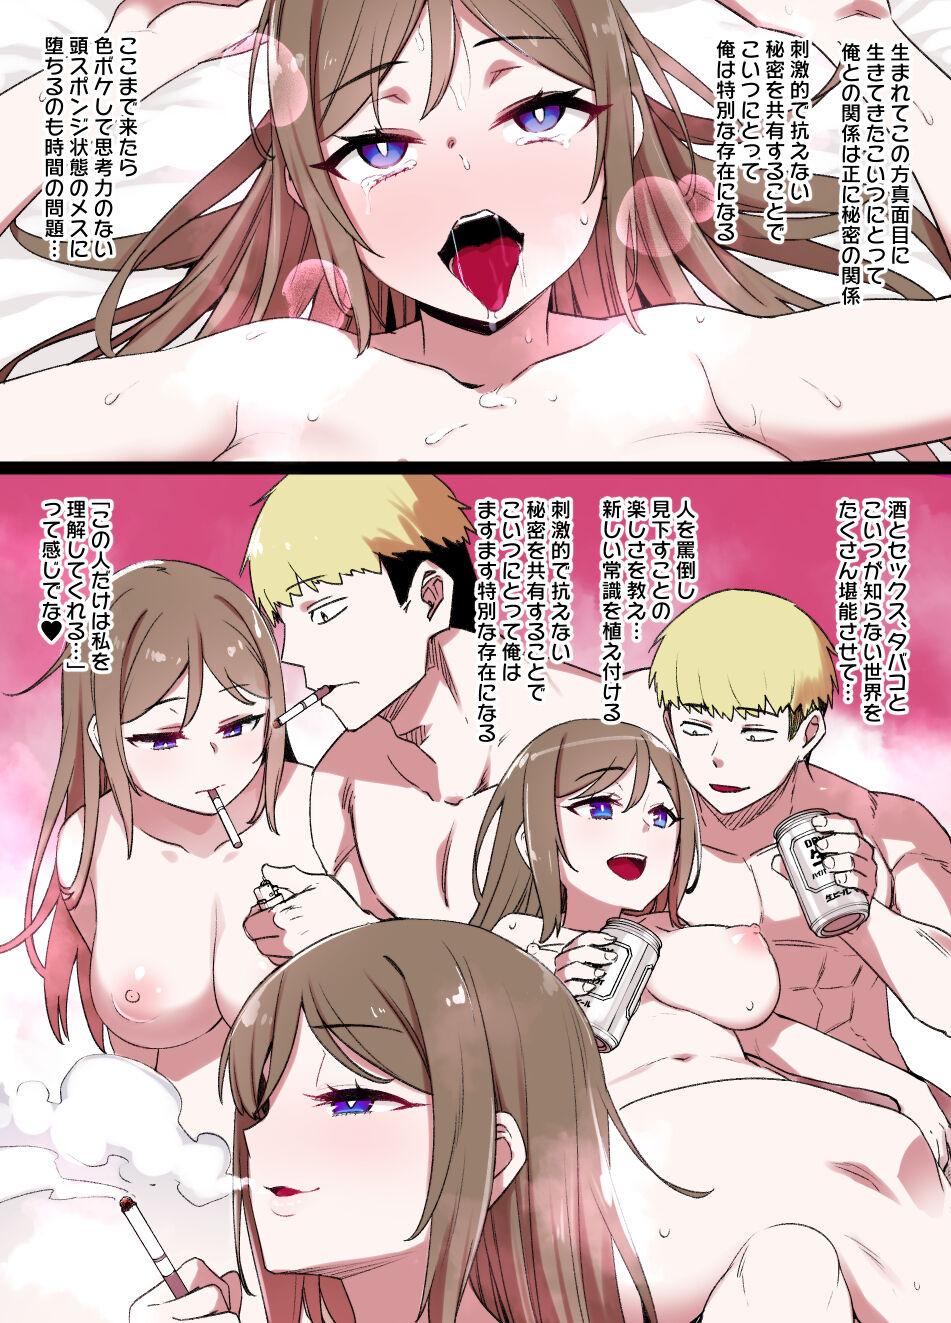 Tribbing 100日後に寝取られる彼女～桐谷シンSIDE～漫画12P - Original Asia - Page 8